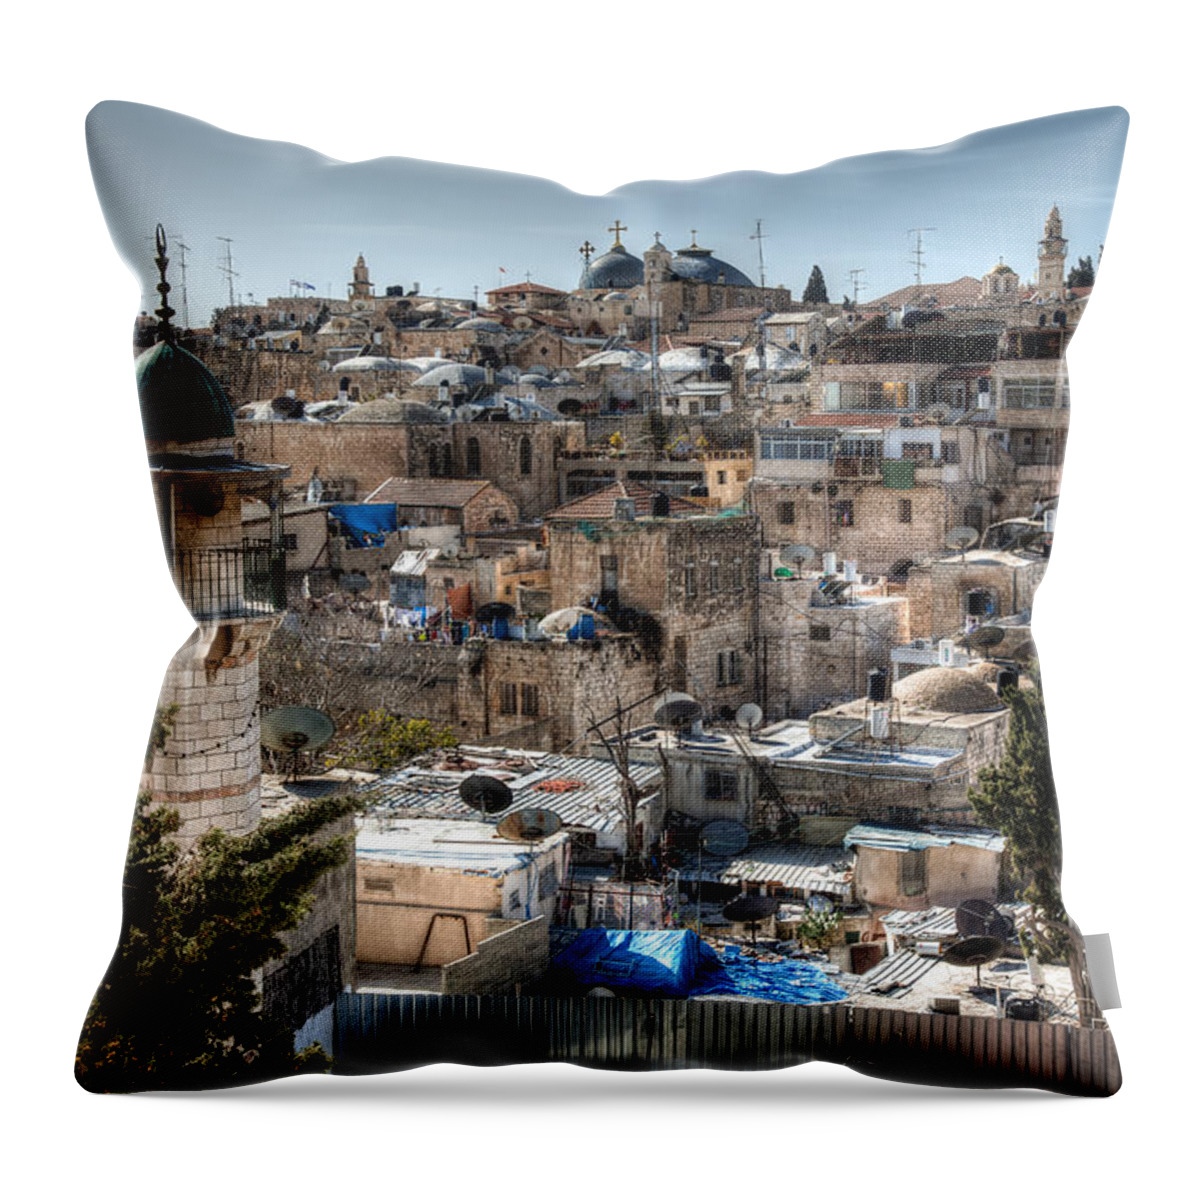 Churches Throw Pillow featuring the photograph Churches and Mosques by Uri Baruch